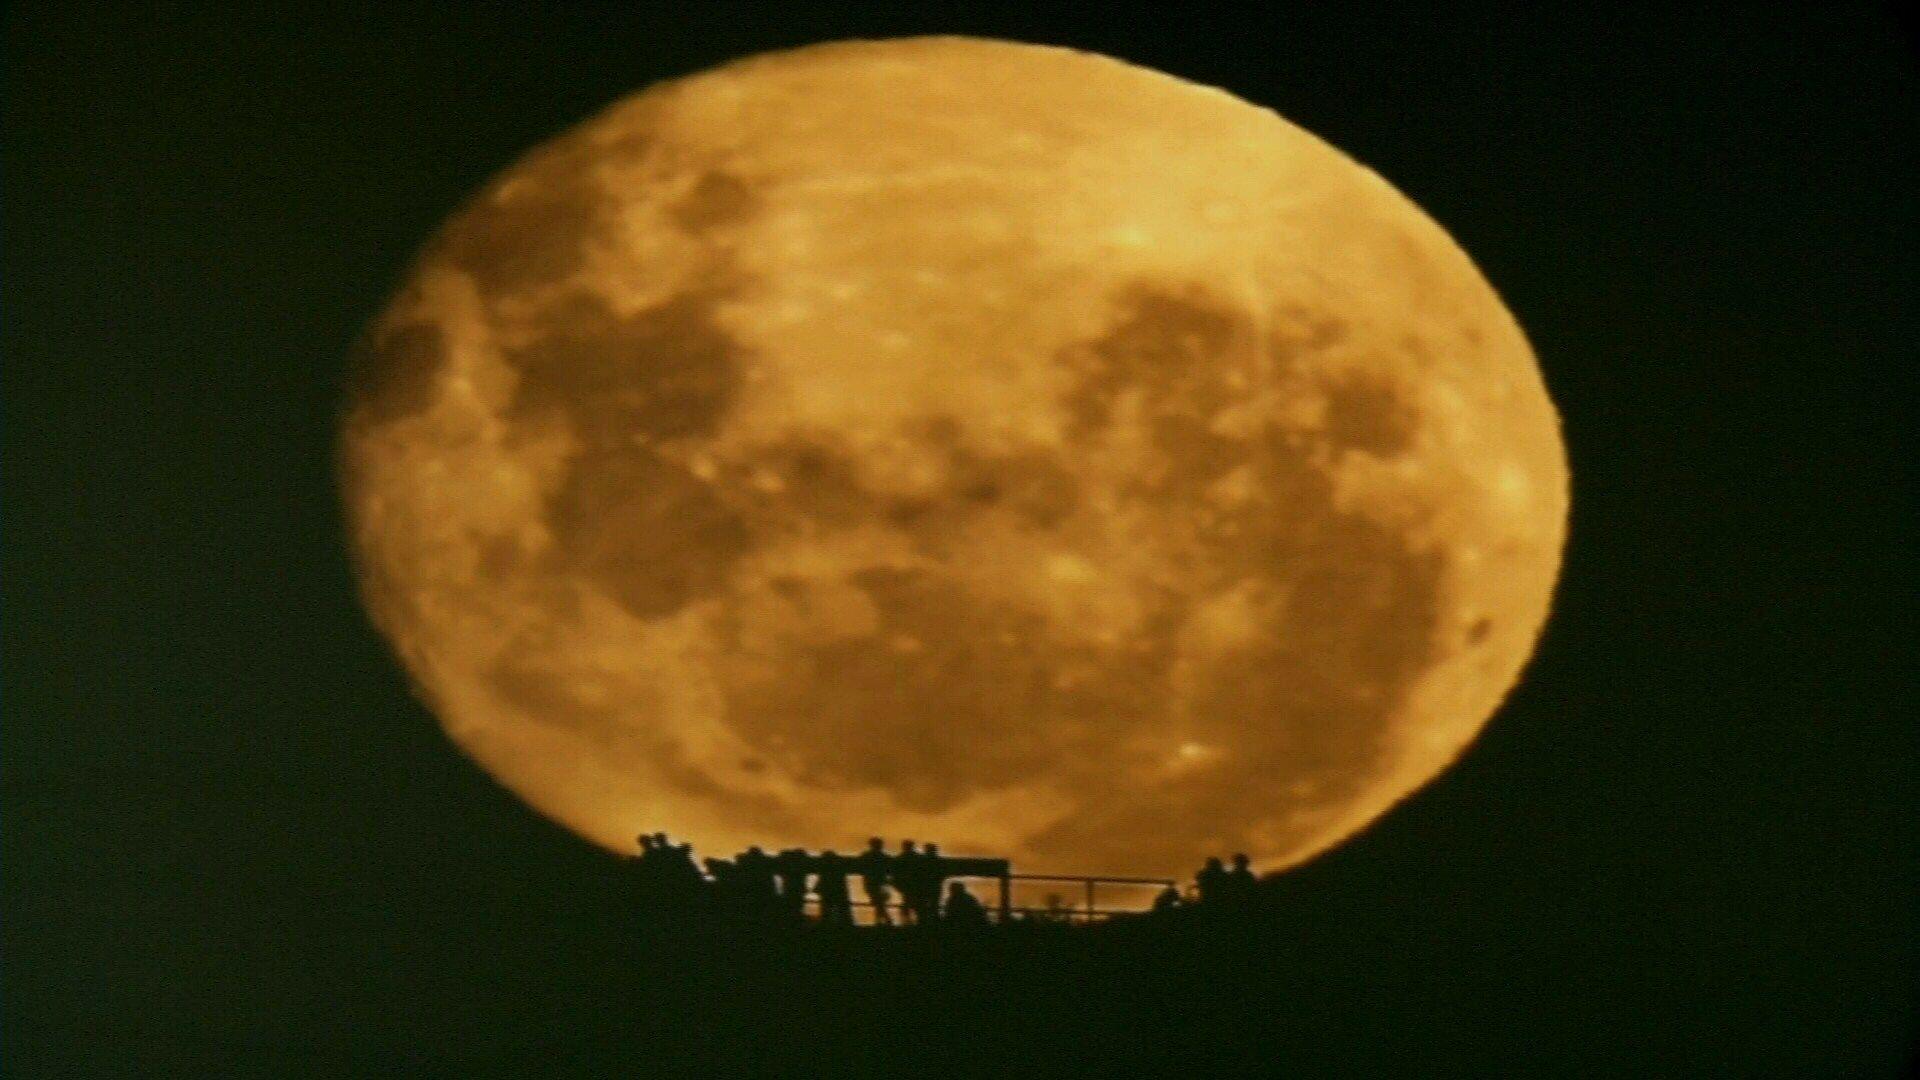 Its been 150 years since the last super blue blood moon